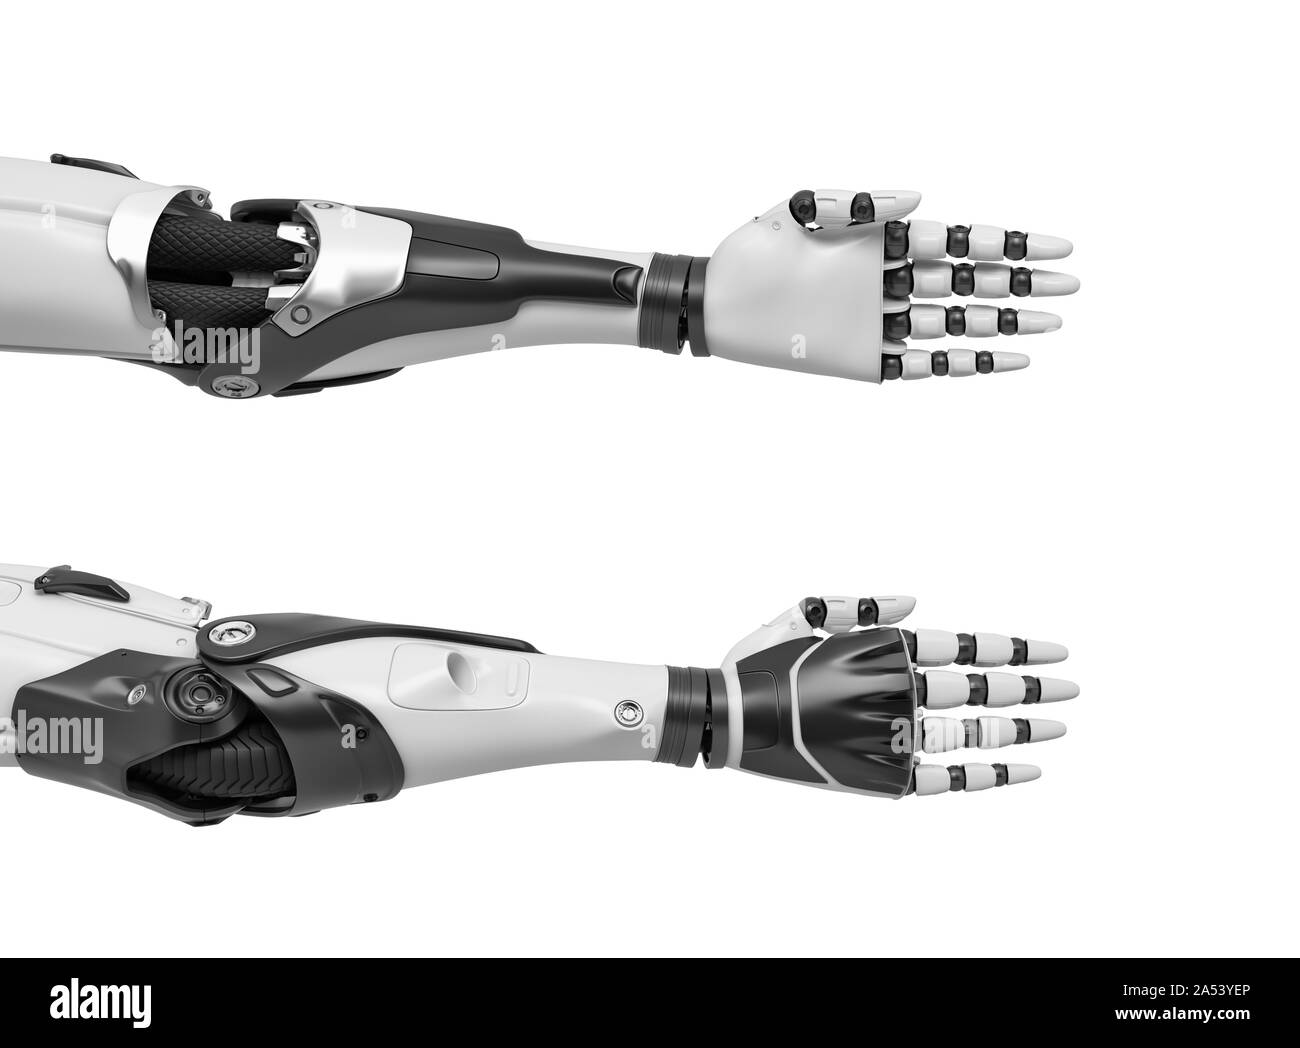 3d rendering of two robot arms with hand fingers held straight and compact for a tight handshake. Stock Photo